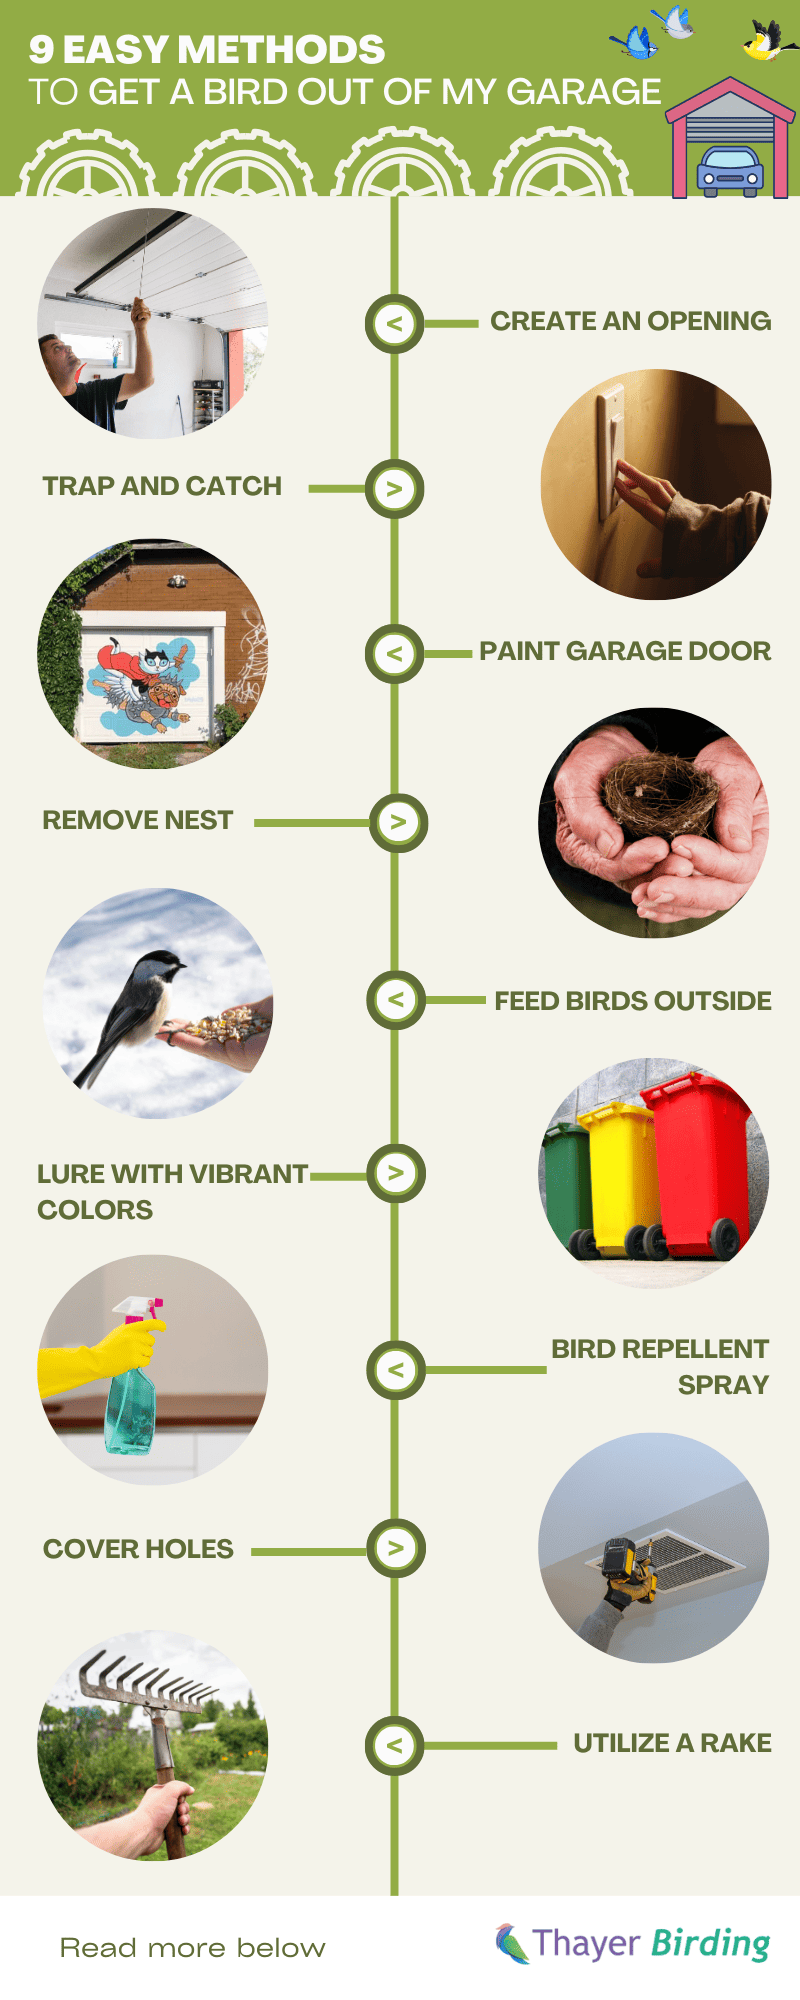 9-Easy-Methods-To-get-a-bird-out-of-my-garage